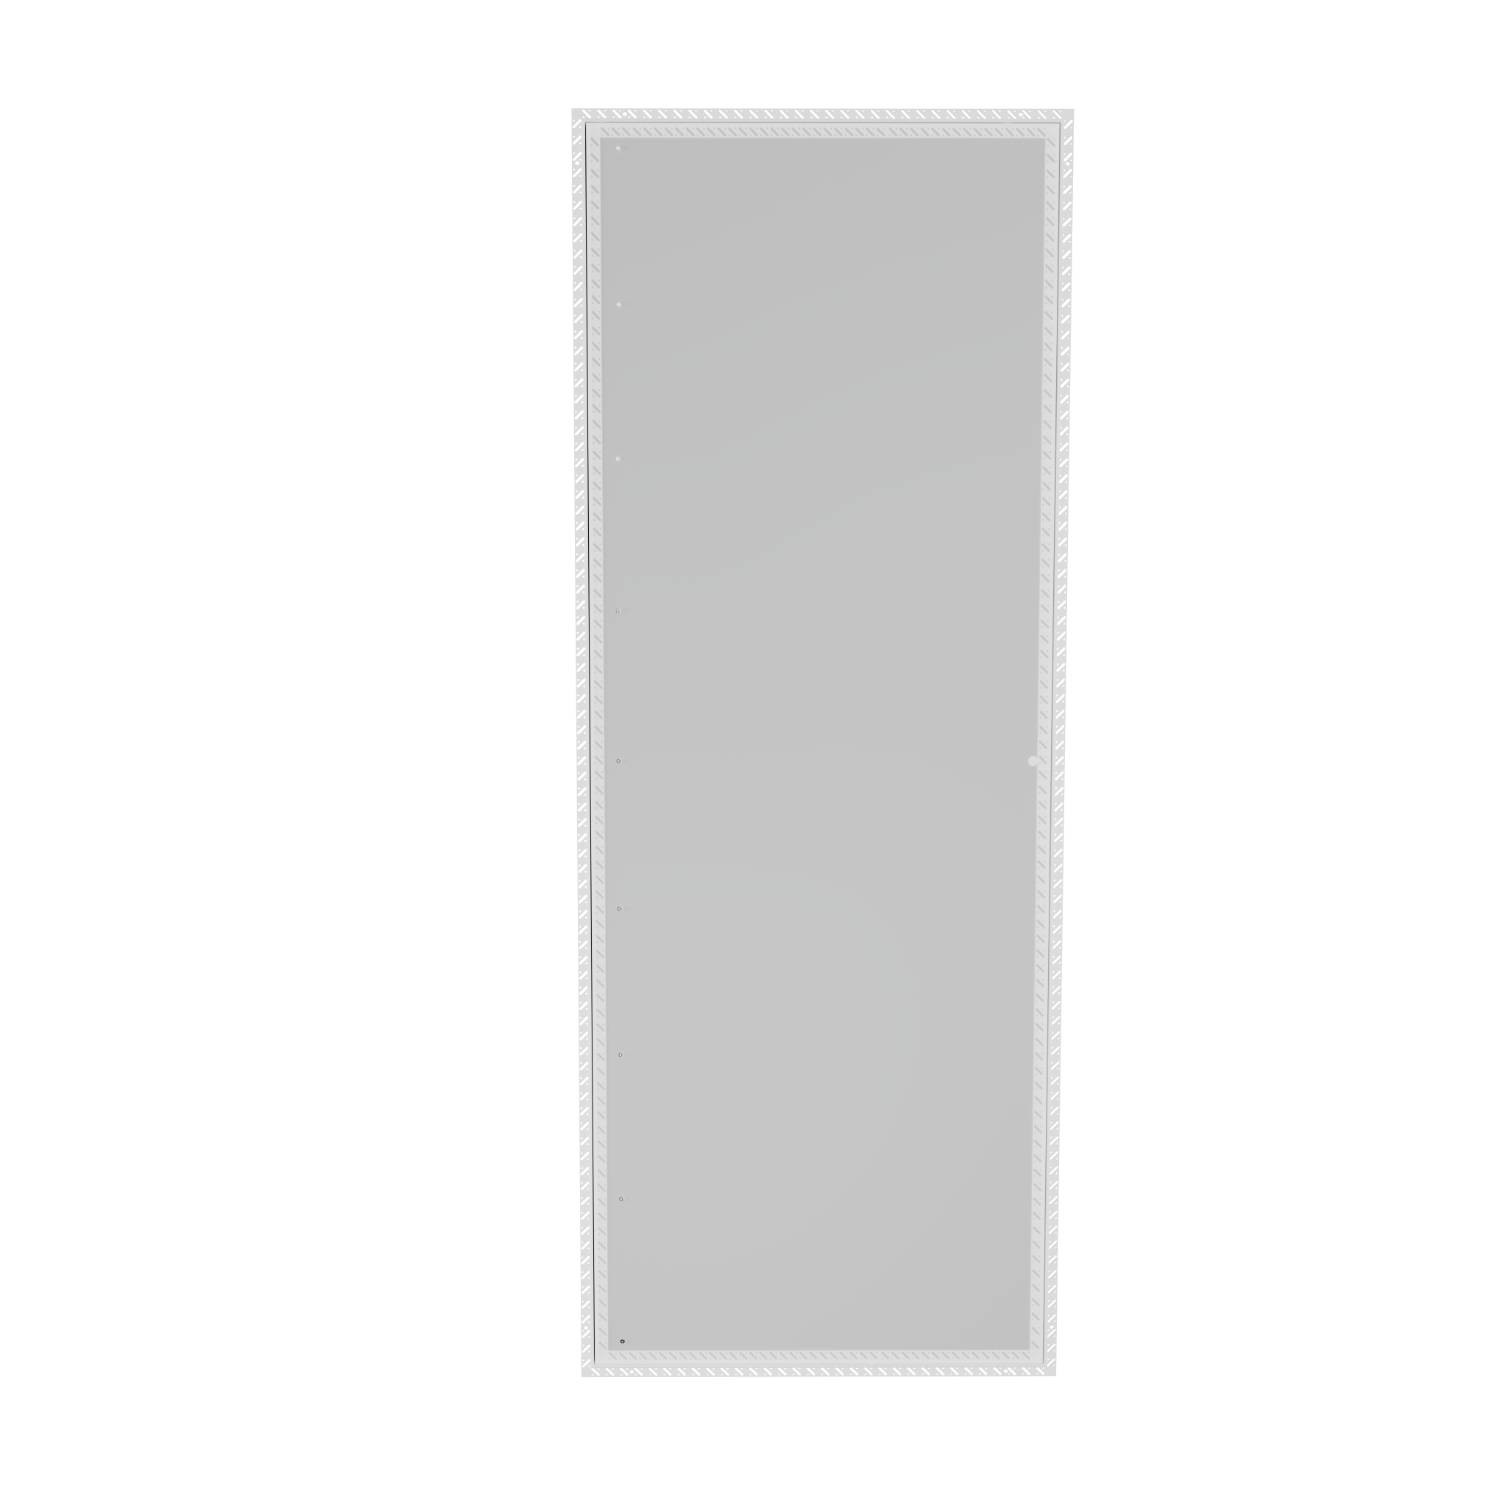 Plasterboard Riser Door (EX53 Range) - Beaded Frame - 2 Hour Fire Rated - High Security - Wall Access Panel